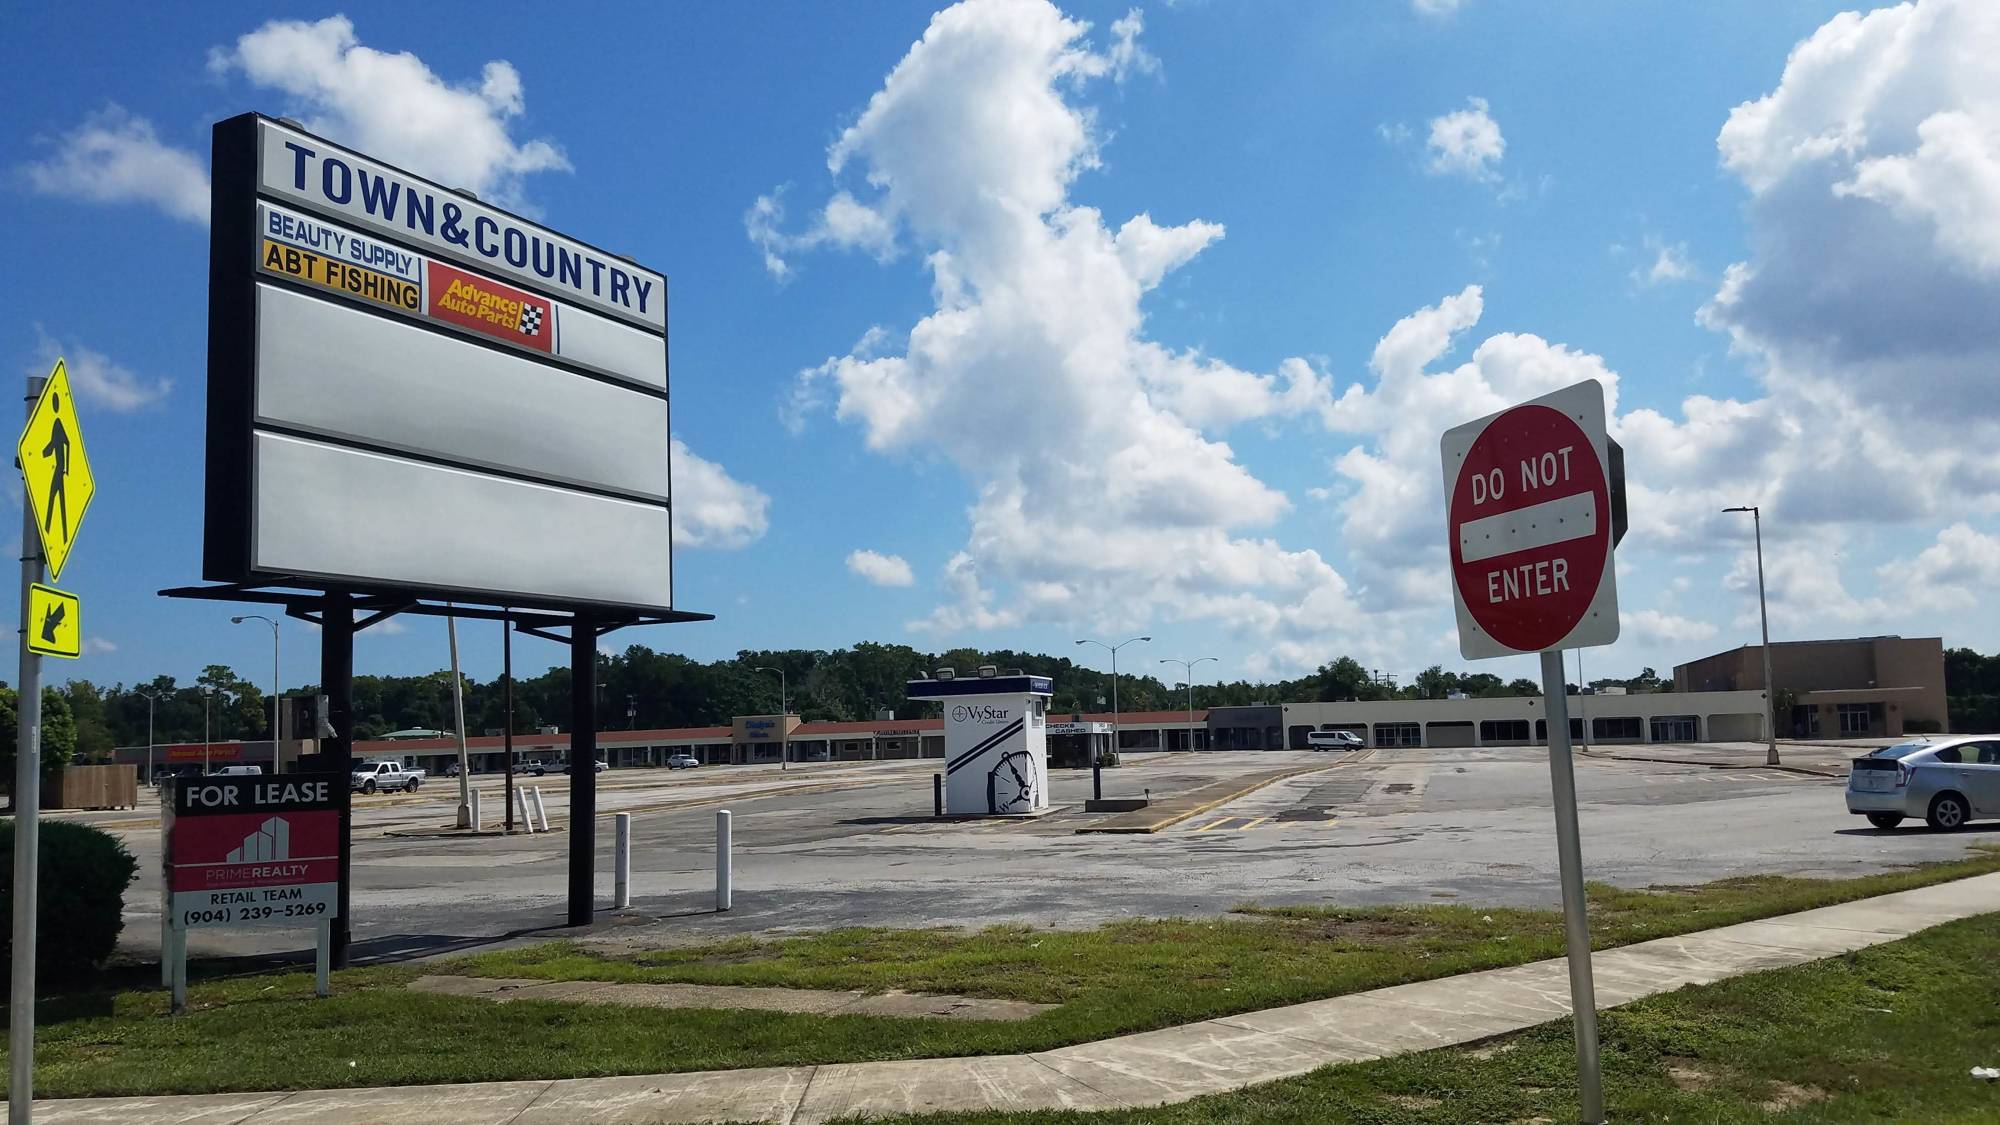 College Park, the renamed Town & Country Shopping Center, is anchored by Advance Auto Parts, Dollar General, DaVita Kidney Care and Legacy Ministries Worship Center.